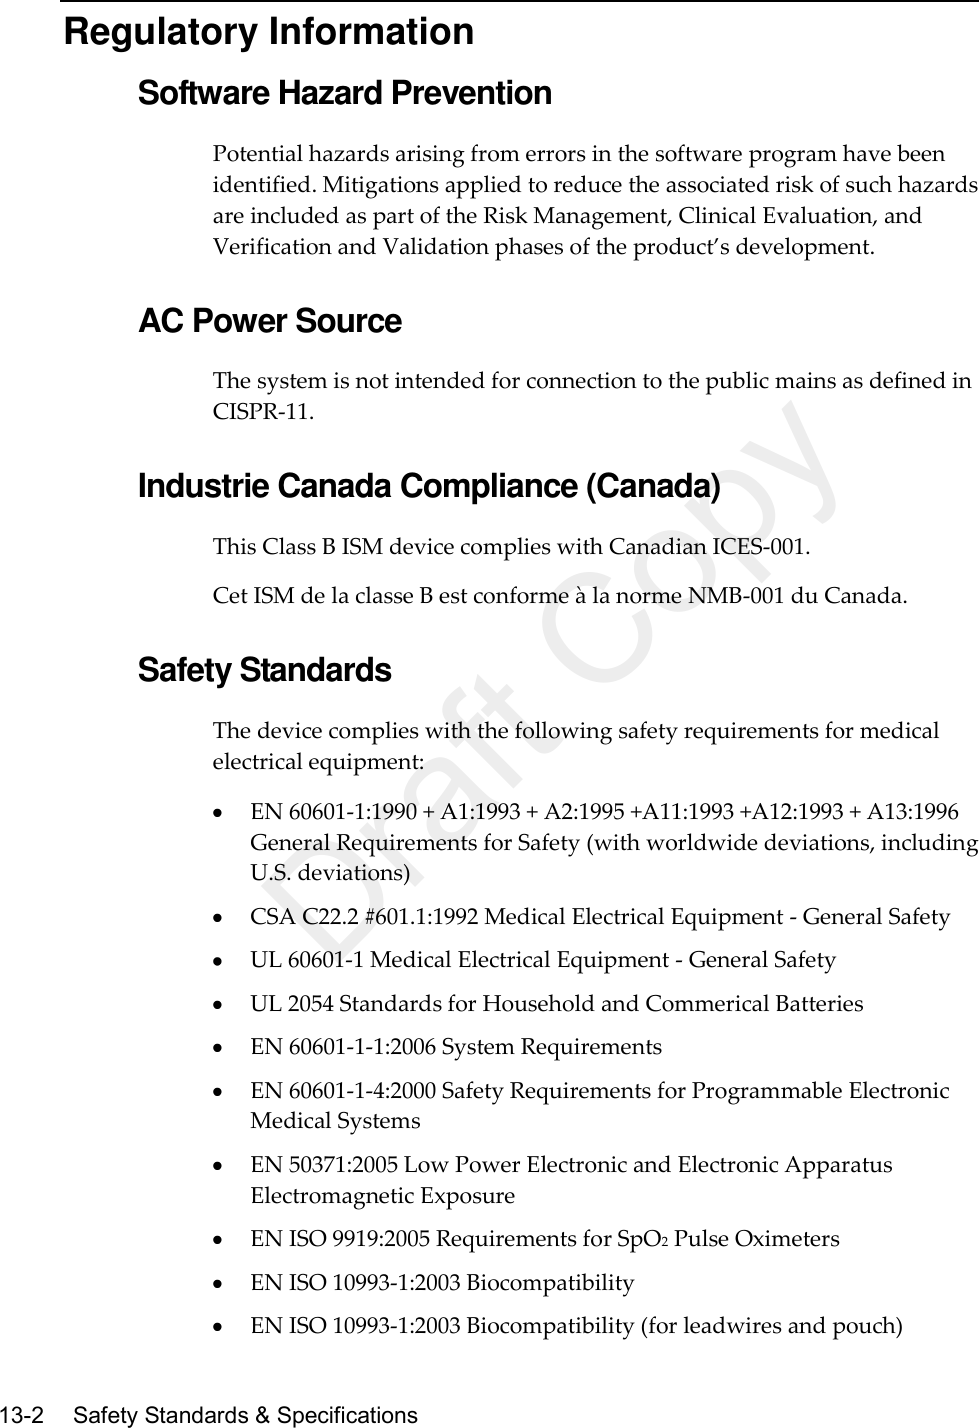   13-2   Safety Standards &amp; Specifications  Regulatory Information Software Hazard Prevention Potential hazards arising from errors in the software program have been identified. Mitigations applied to reduce the associated risk of such hazards are included as part of the Risk Management, Clinical Evaluation, and Verification and Validation phases of the product’s development.  AC Power Source The system is not intended for connection to the public mains as defined in CISPR-11.  Industrie Canada Compliance (Canada) This Class B ISM device complies with Canadian ICES-001. Cet ISM de la classe B est conforme à la norme NMB-001 du Canada.  Safety Standards The device complies with the following safety requirements for medical electrical equipment:  EN 60601-1:1990 + A1:1993 + A2:1995 +A11:1993 +A12:1993 + A13:1996 General Requirements for Safety (with worldwide deviations, including U.S. deviations)  CSA C22.2 #601.1:1992 Medical Electrical Equipment - General Safety  UL 60601-1 Medical Electrical Equipment - General Safety  UL 2054 Standards for Household and Commerical Batteries  EN 60601-1-1:2006 System Requirements  EN 60601-1-4:2000 Safety Requirements for Programmable Electronic Medical Systems  EN 50371:2005 Low Power Electronic and Electronic Apparatus Electromagnetic Exposure  EN ISO 9919:2005 Requirements for SpO2 Pulse Oximeters  EN ISO 10993-1:2003 Biocompatibility  EN ISO 10993-1:2003 Biocompatibility (for leadwires and pouch) Draft Copy